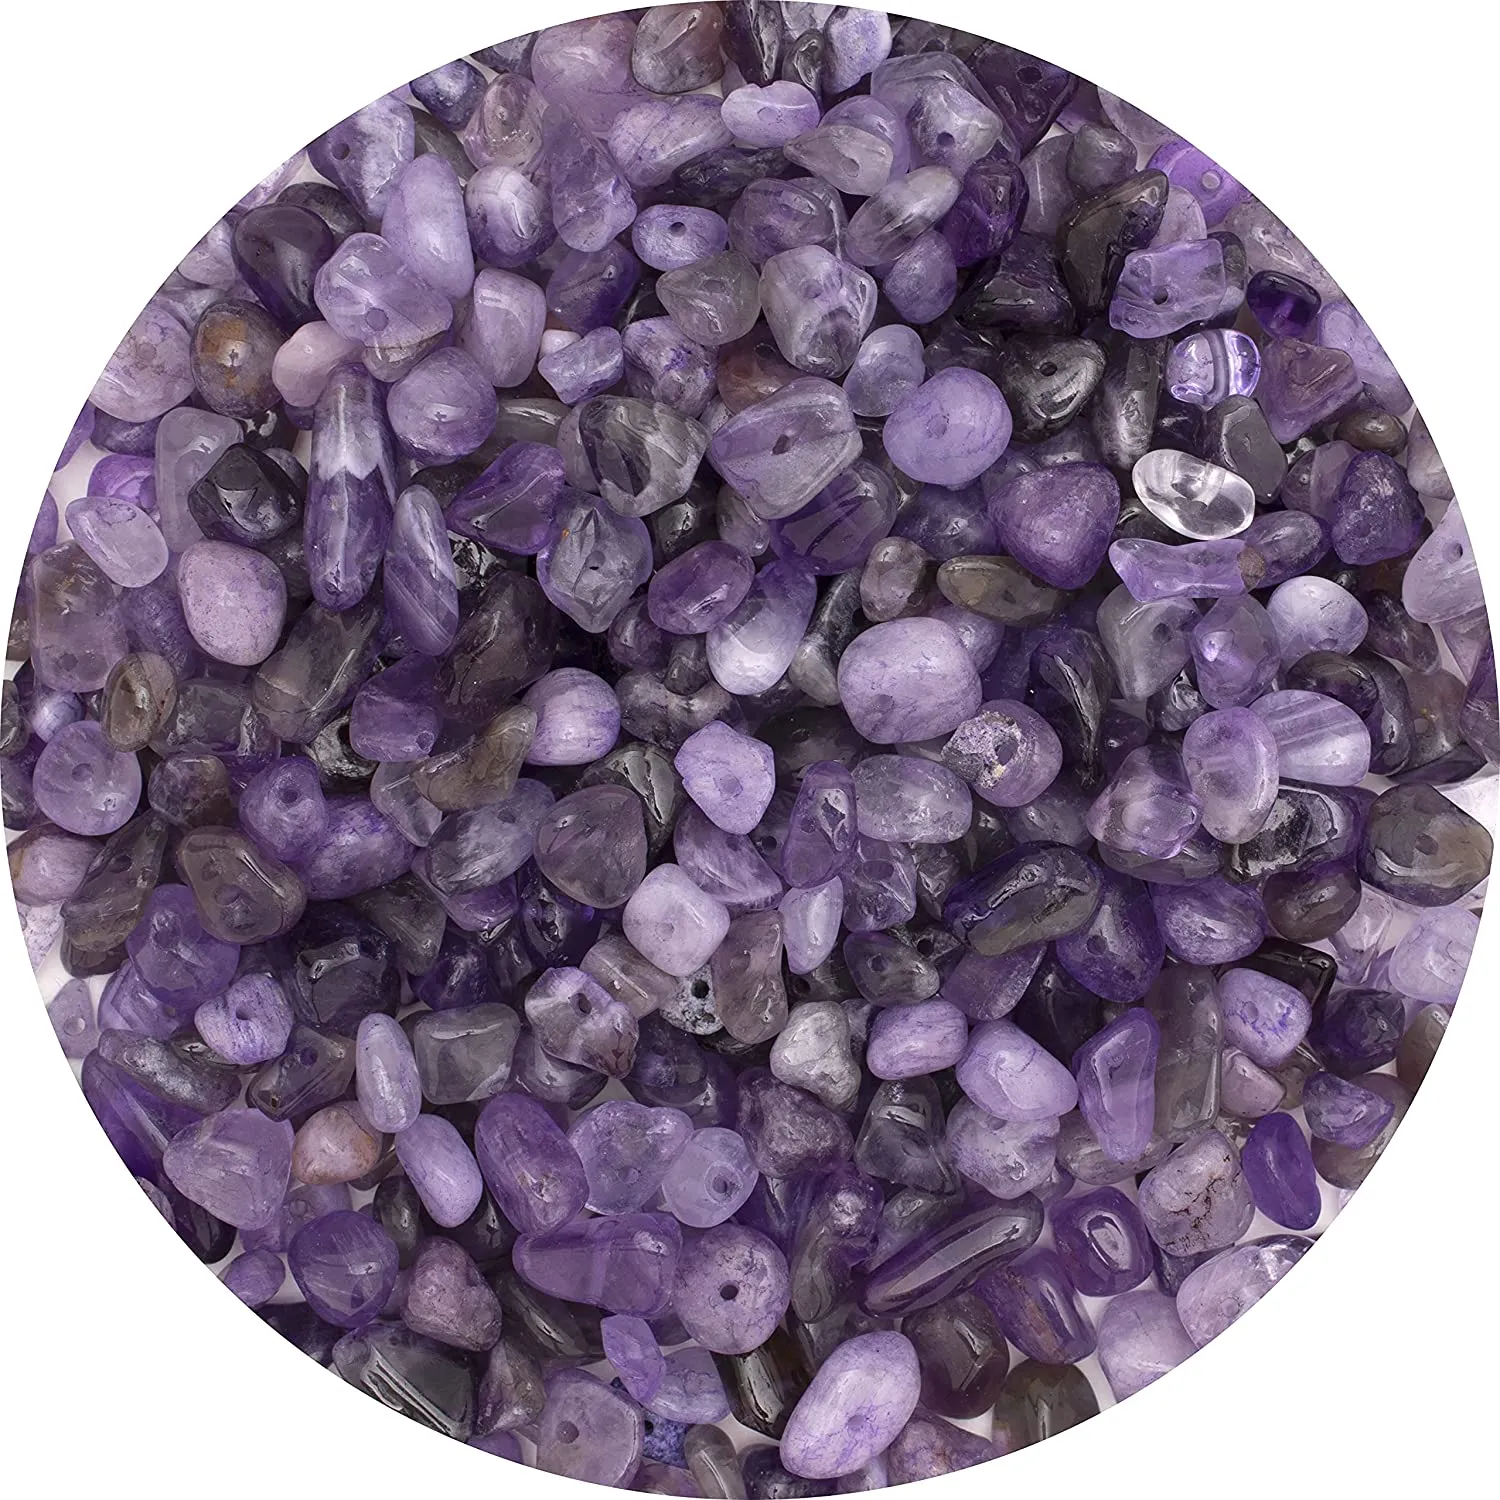 Loose Natural Chips Crystal Beads for Jewelry Making Drilled Polishd Irregular Raw Rock Stone Healing Gemstone Strands 32 inches277E